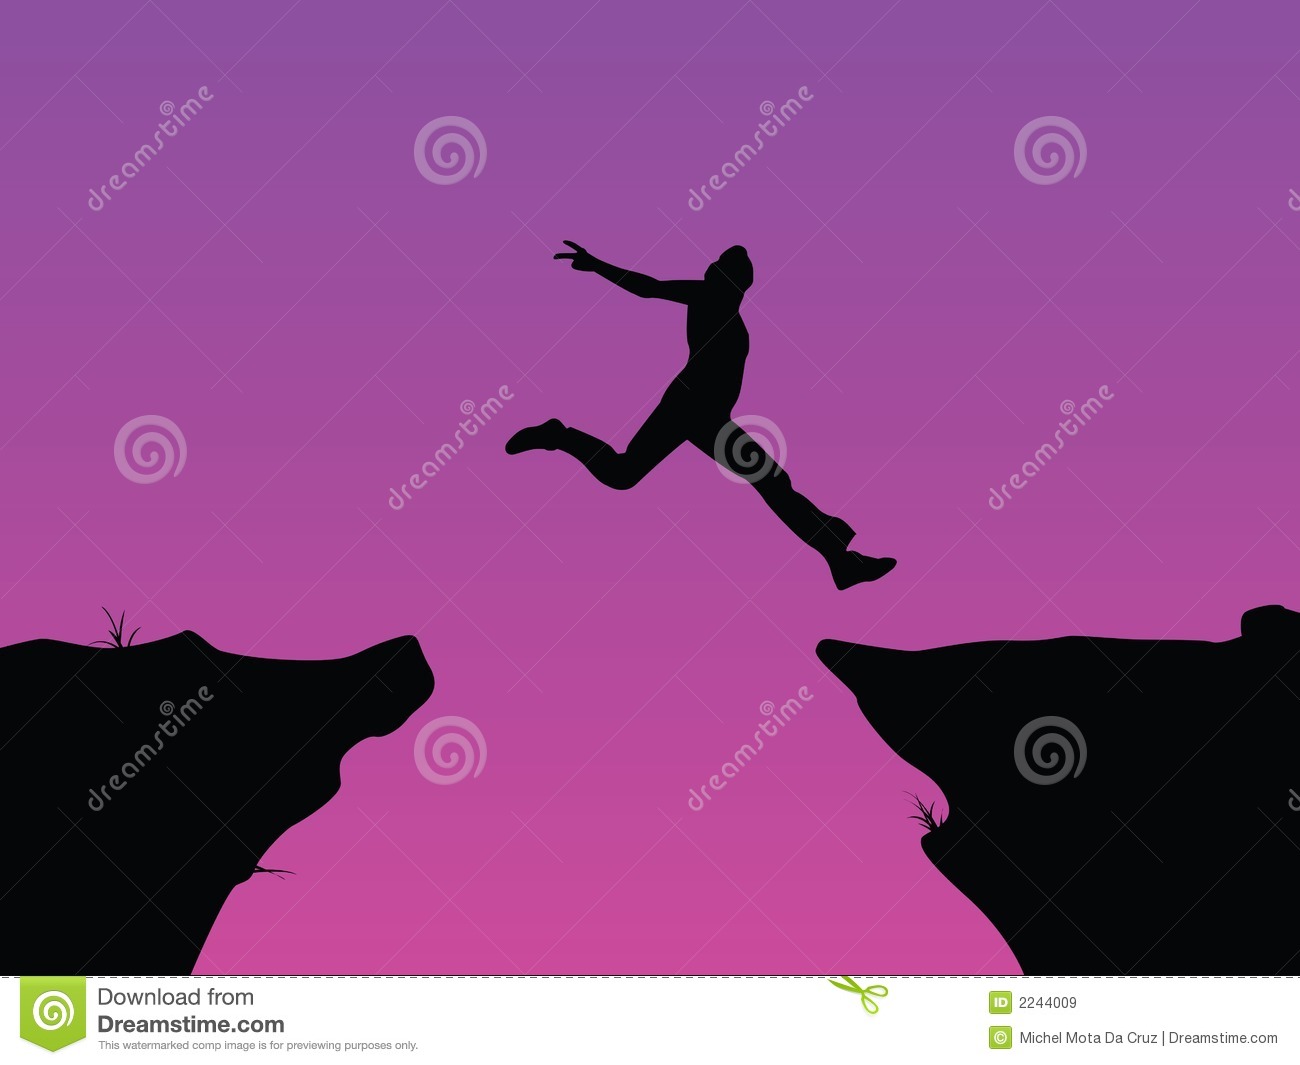 Leap Of Faith Vector Royalty Free Stock Images   Image  2244009